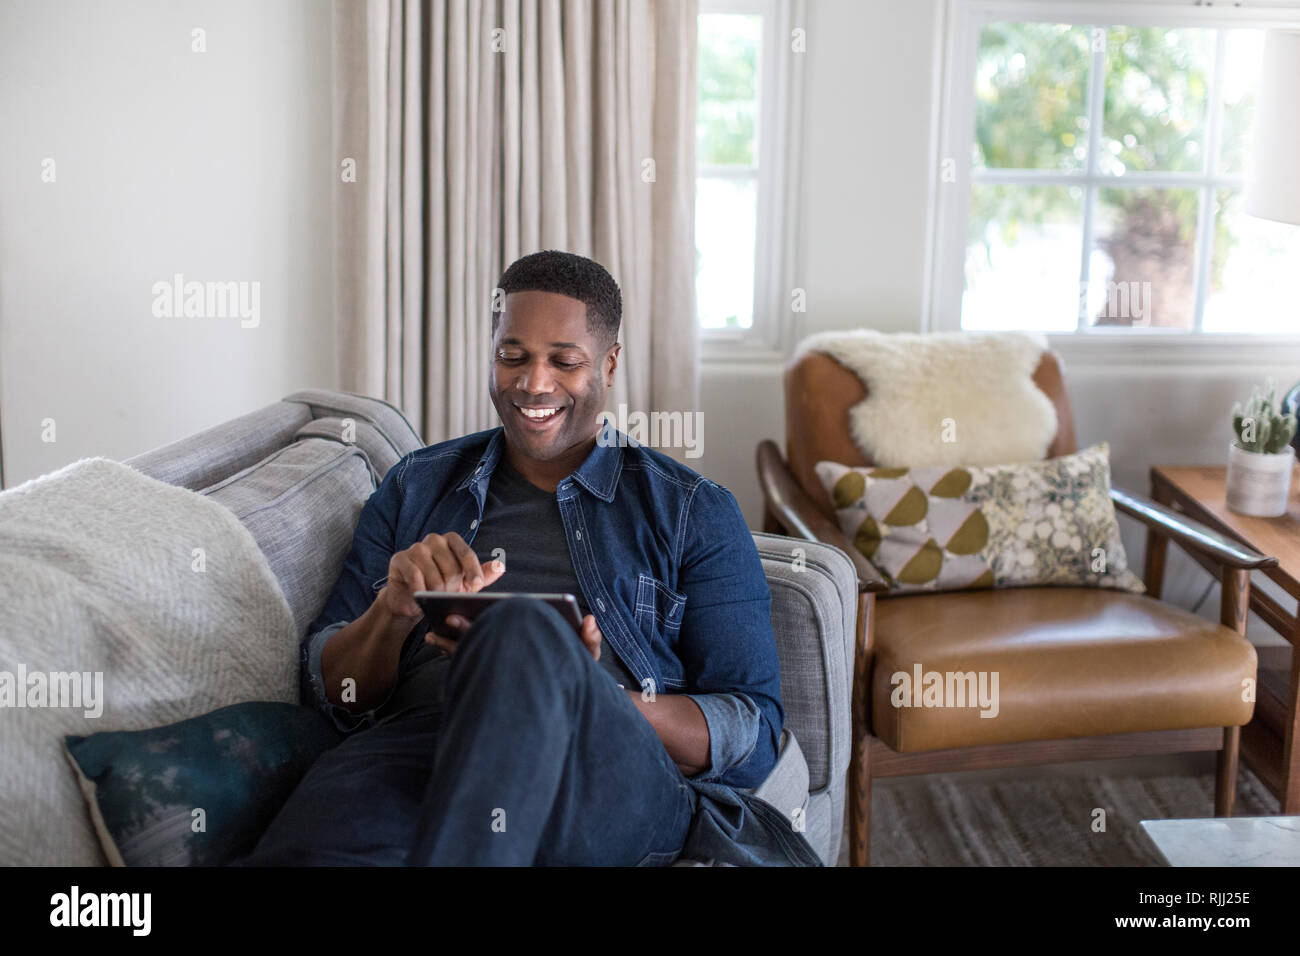 African American adult male using digital tablet at home on sofa Stock Photo